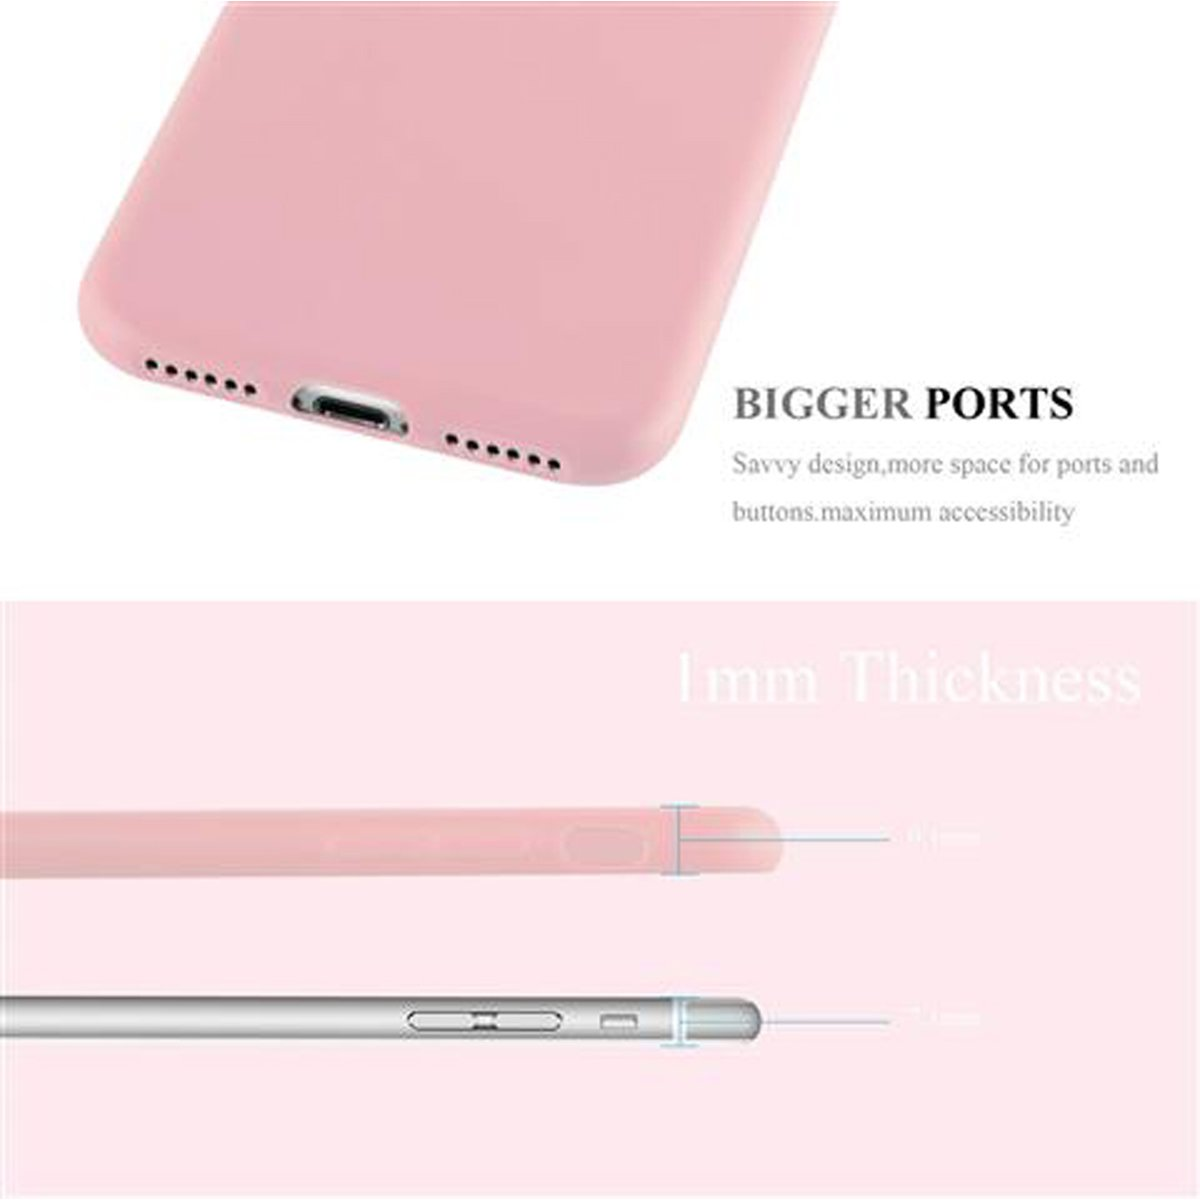 Backcover, Candy / / im 7 CANDY ROSA CADORABO SE Hülle iPhone Apple, 2020, 7S Style, 8 / TPU